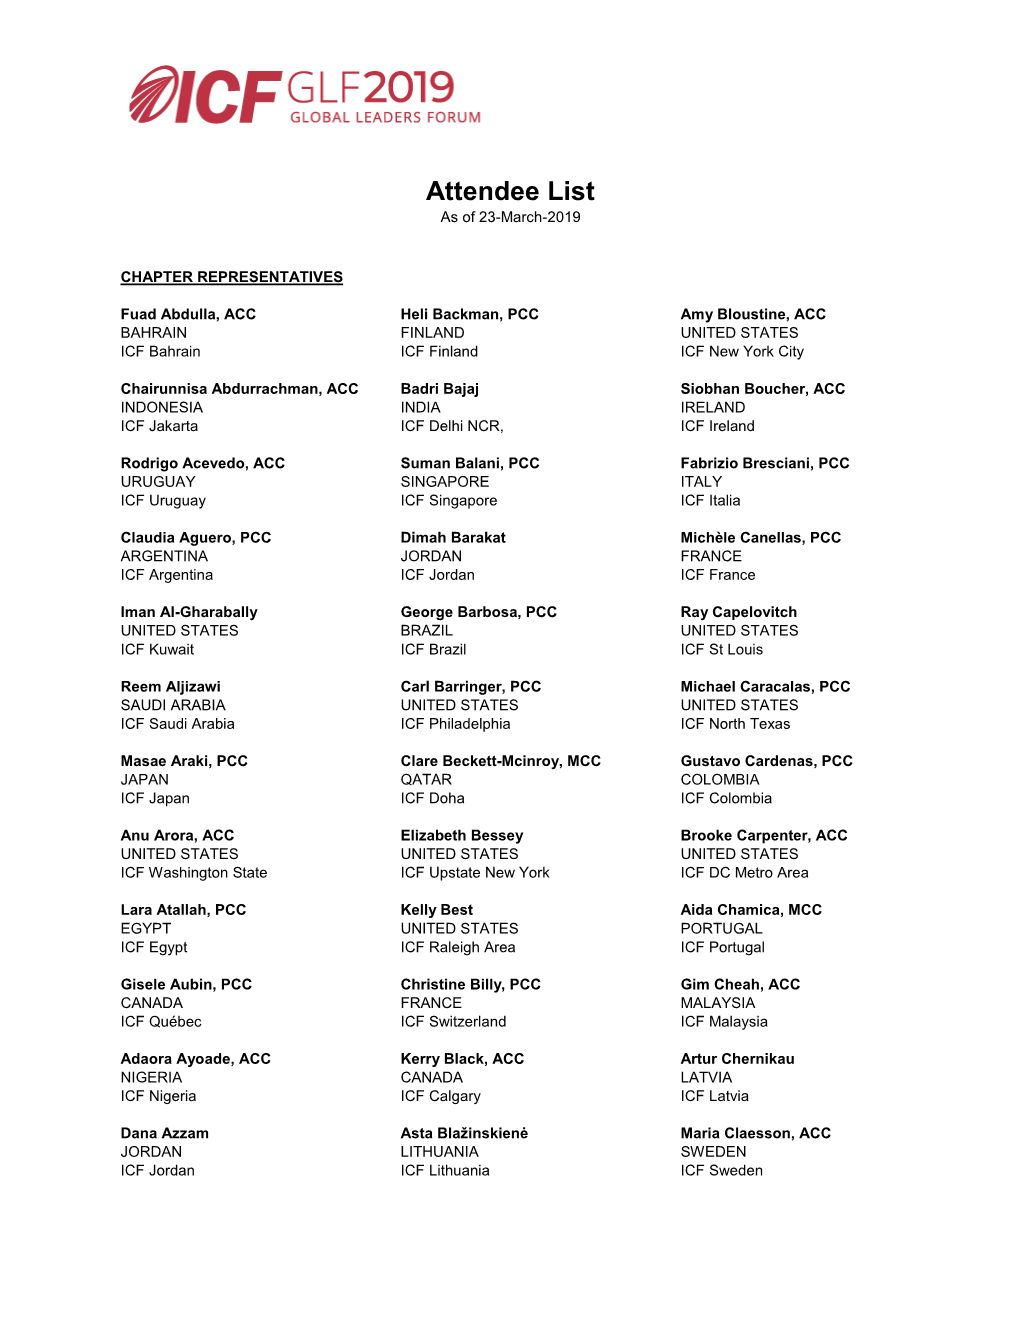 Attendee List As of 23-March-2019